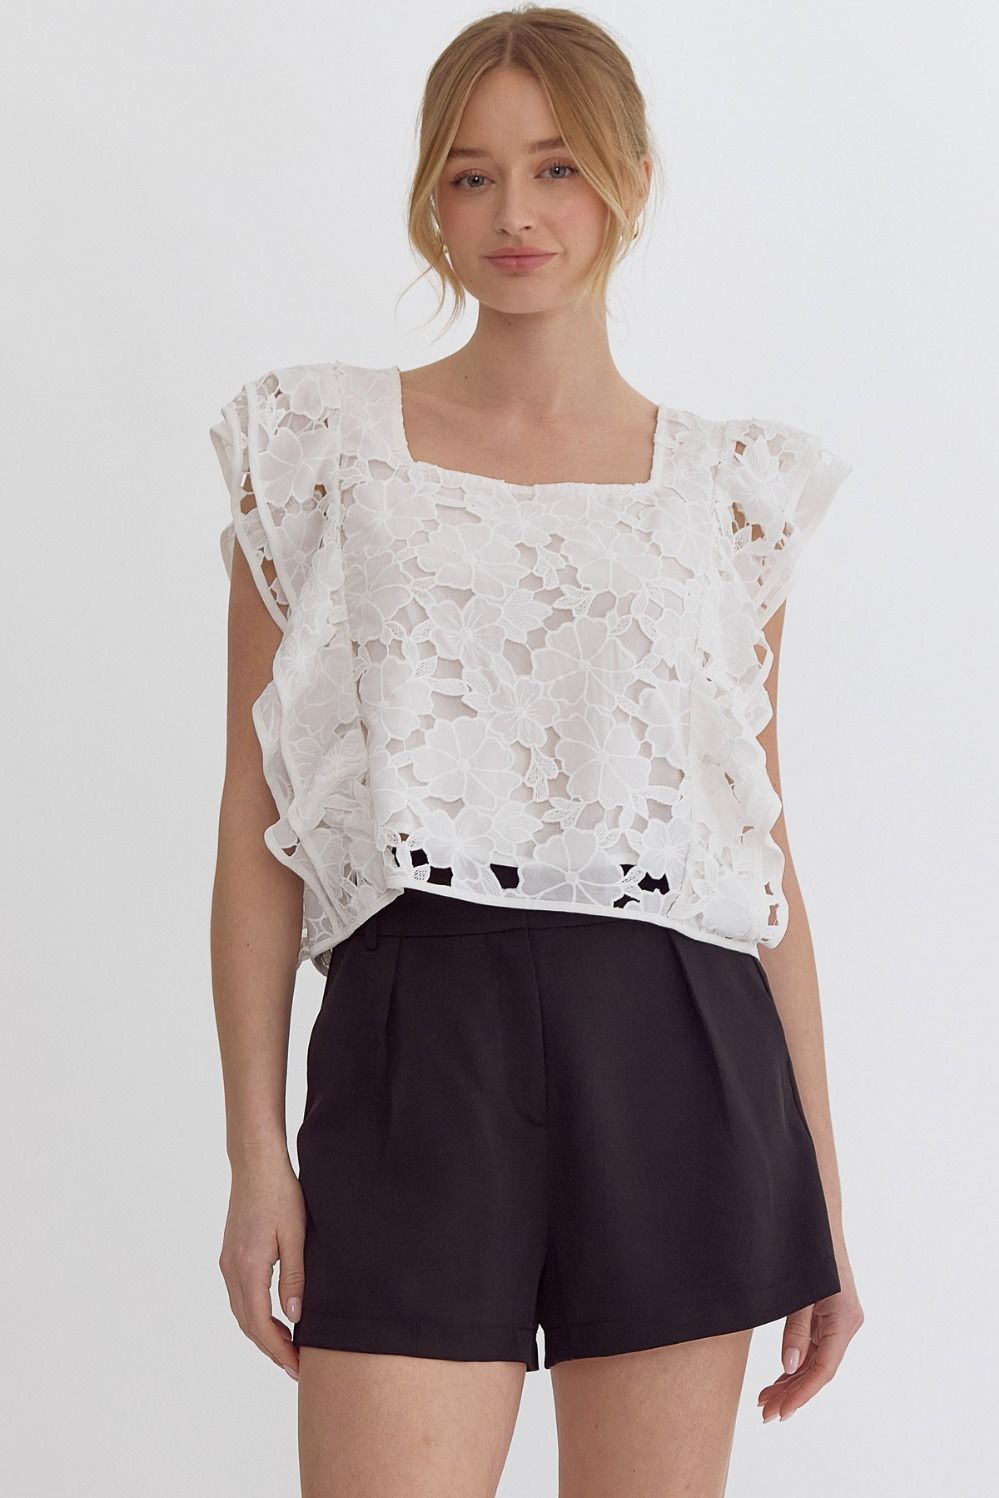 Giving Grace Lace Top